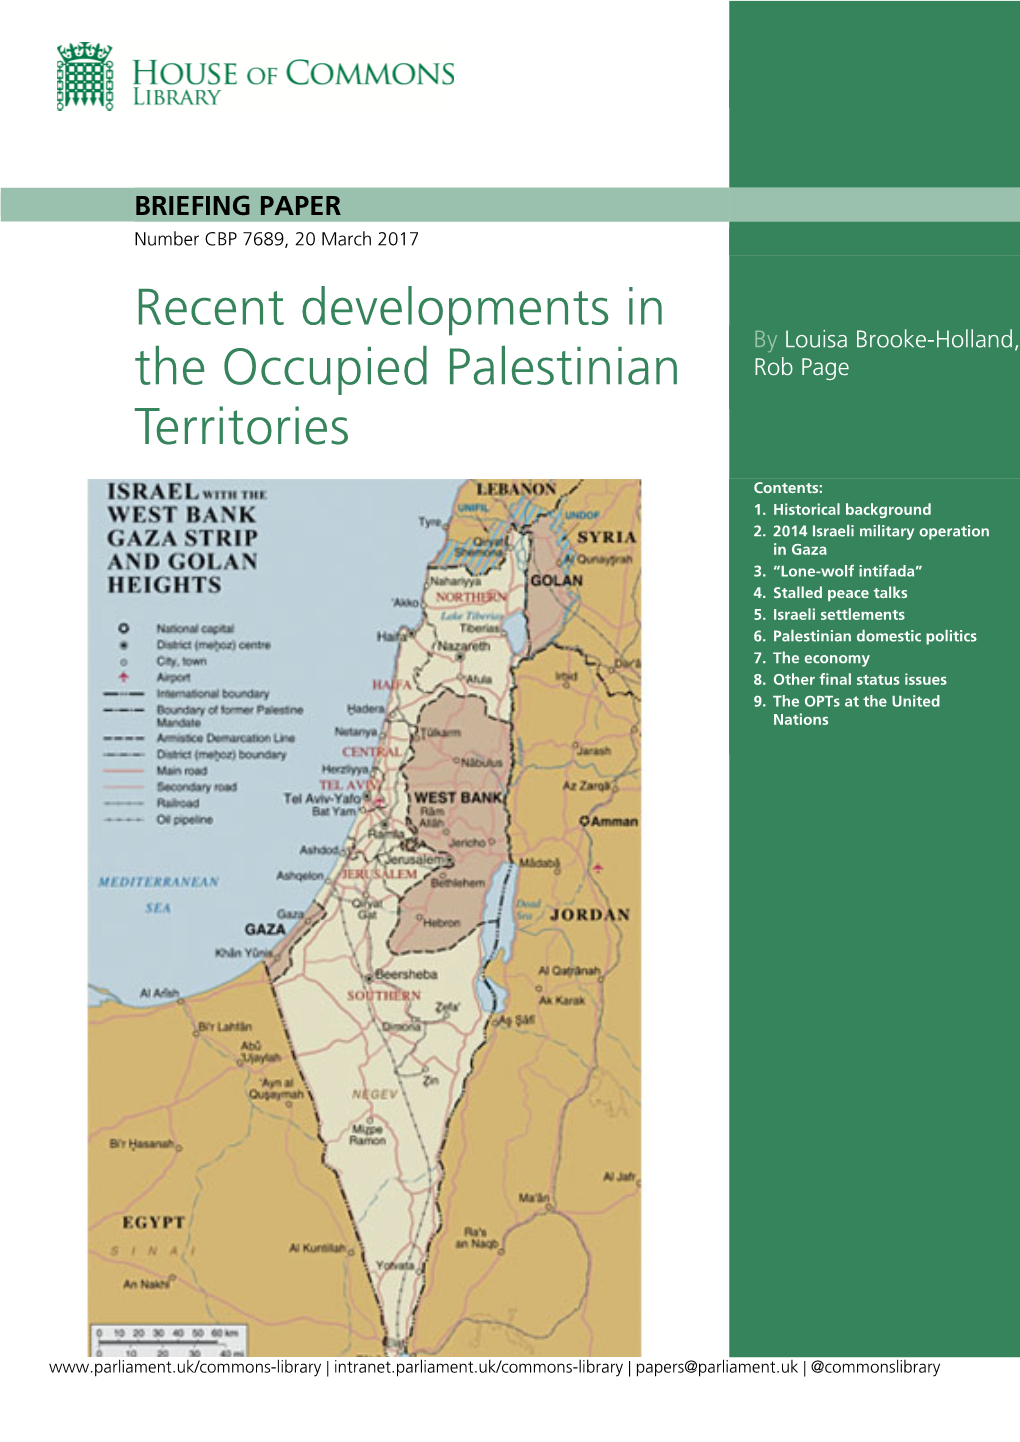 The Occupied Palestinian Territories